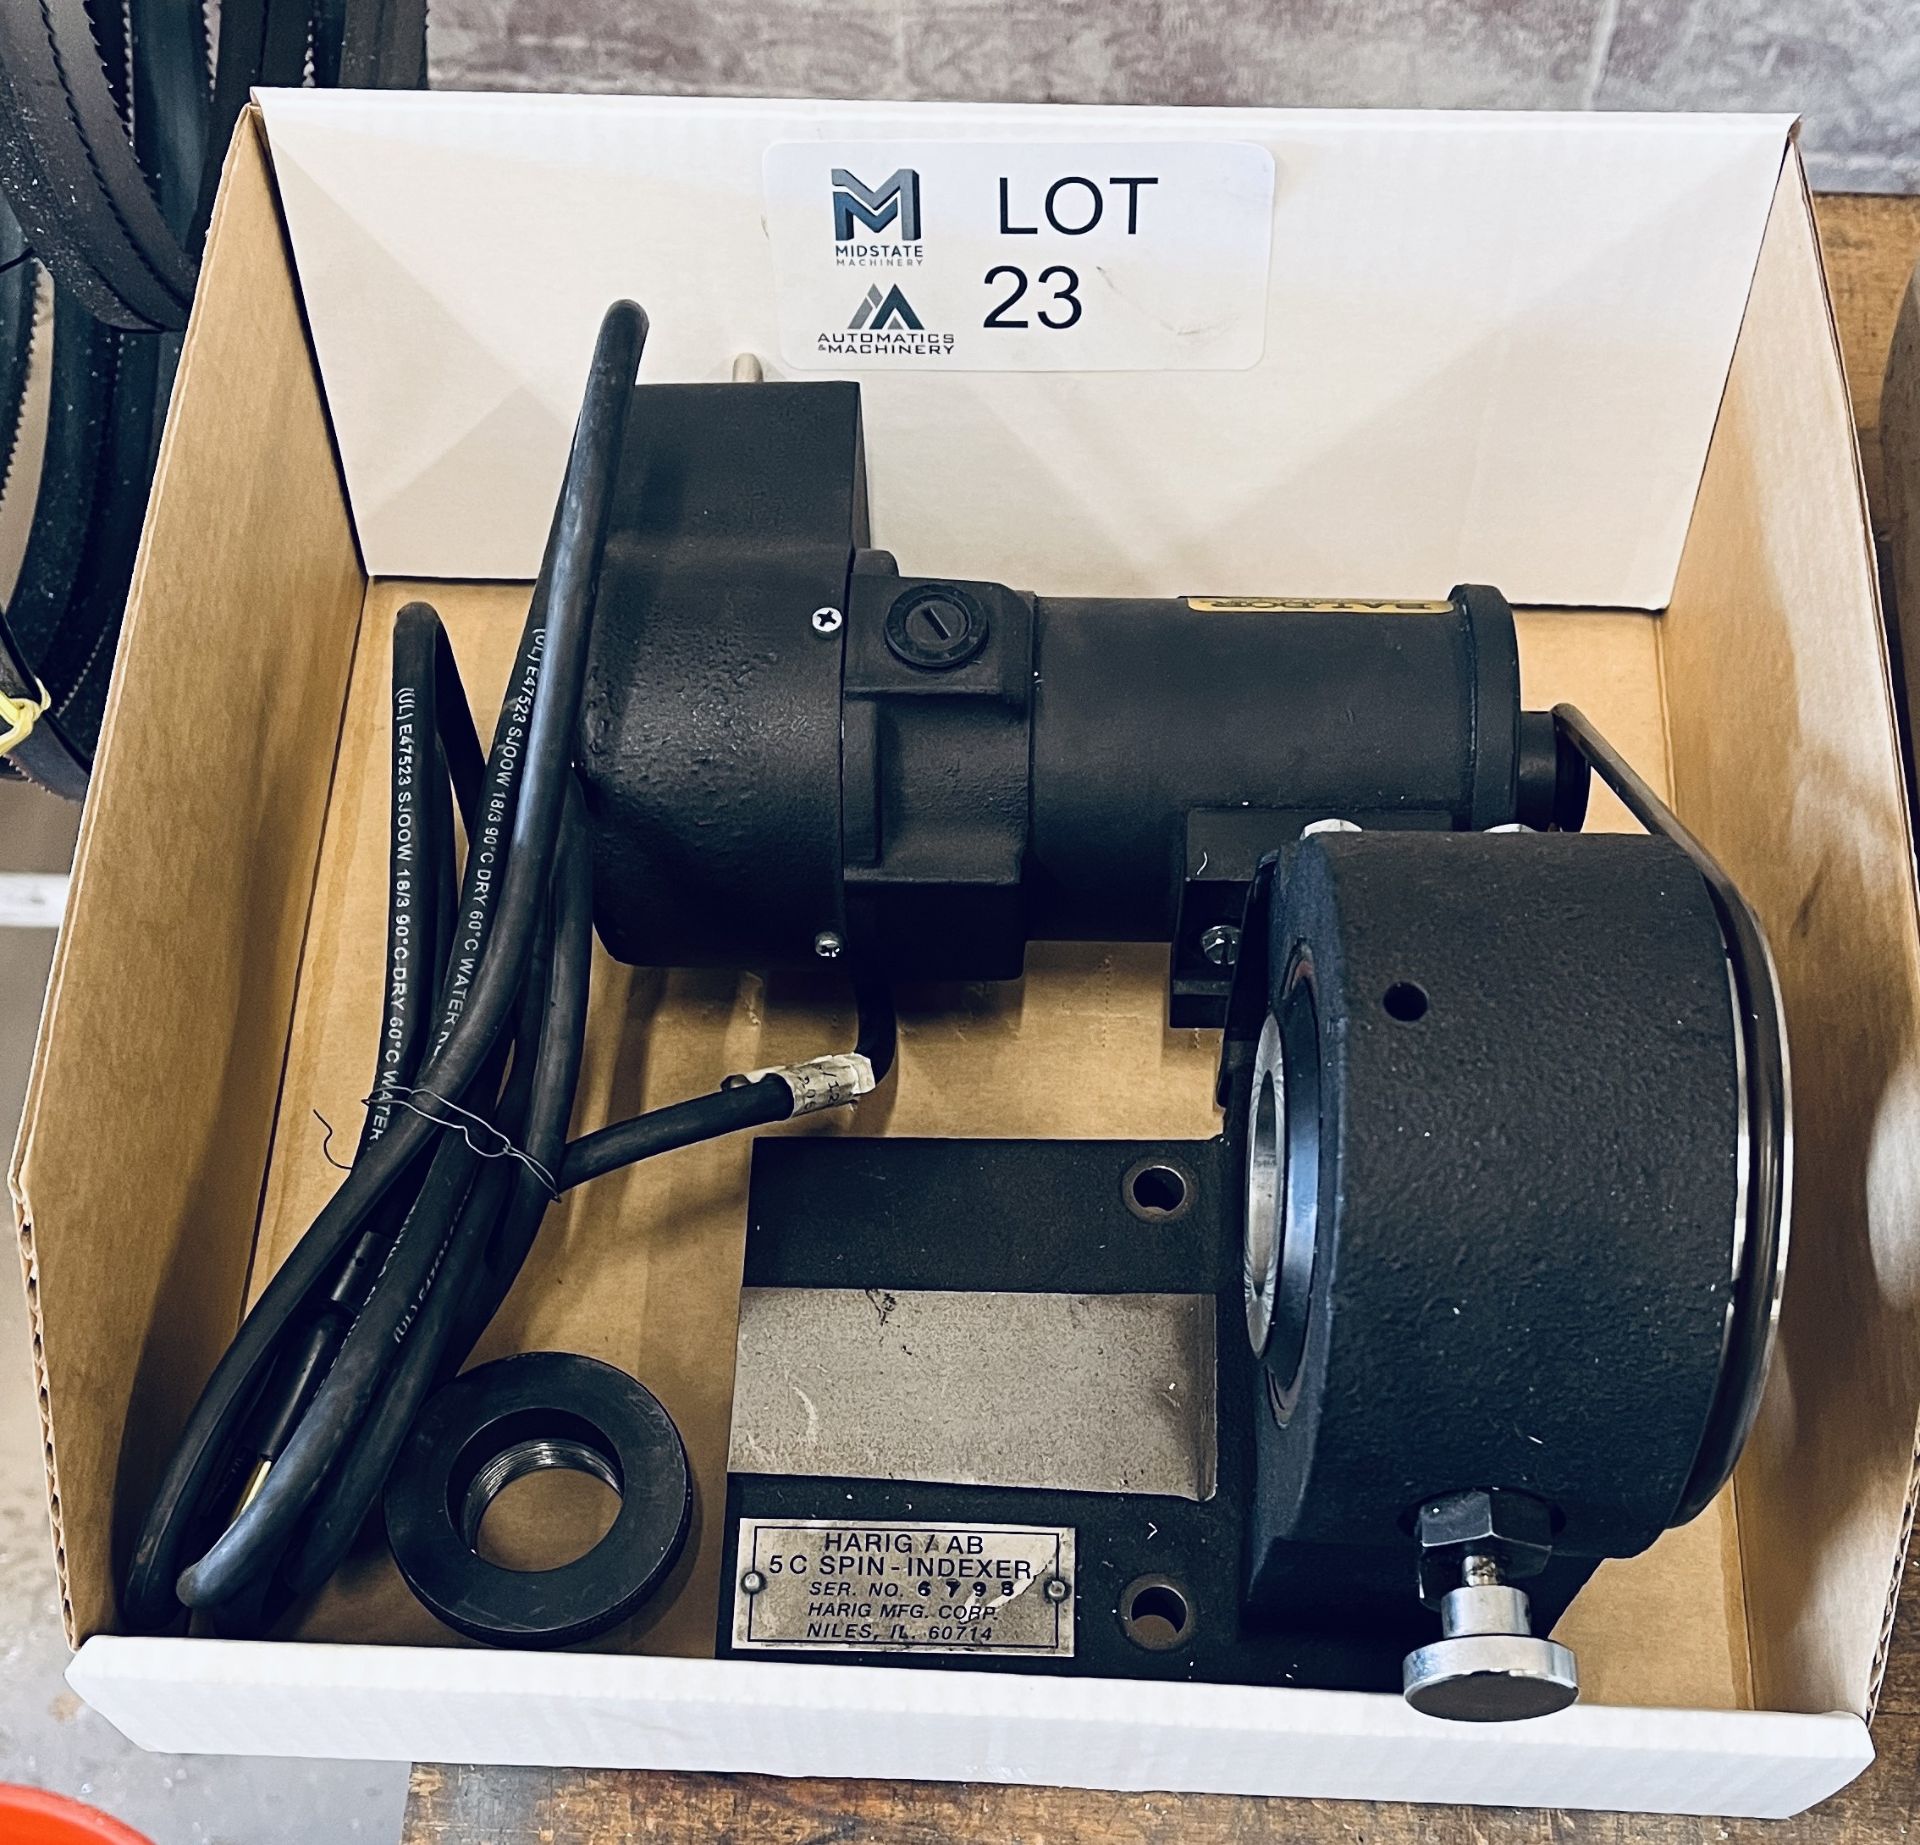 Harig 5C Spin Indexer